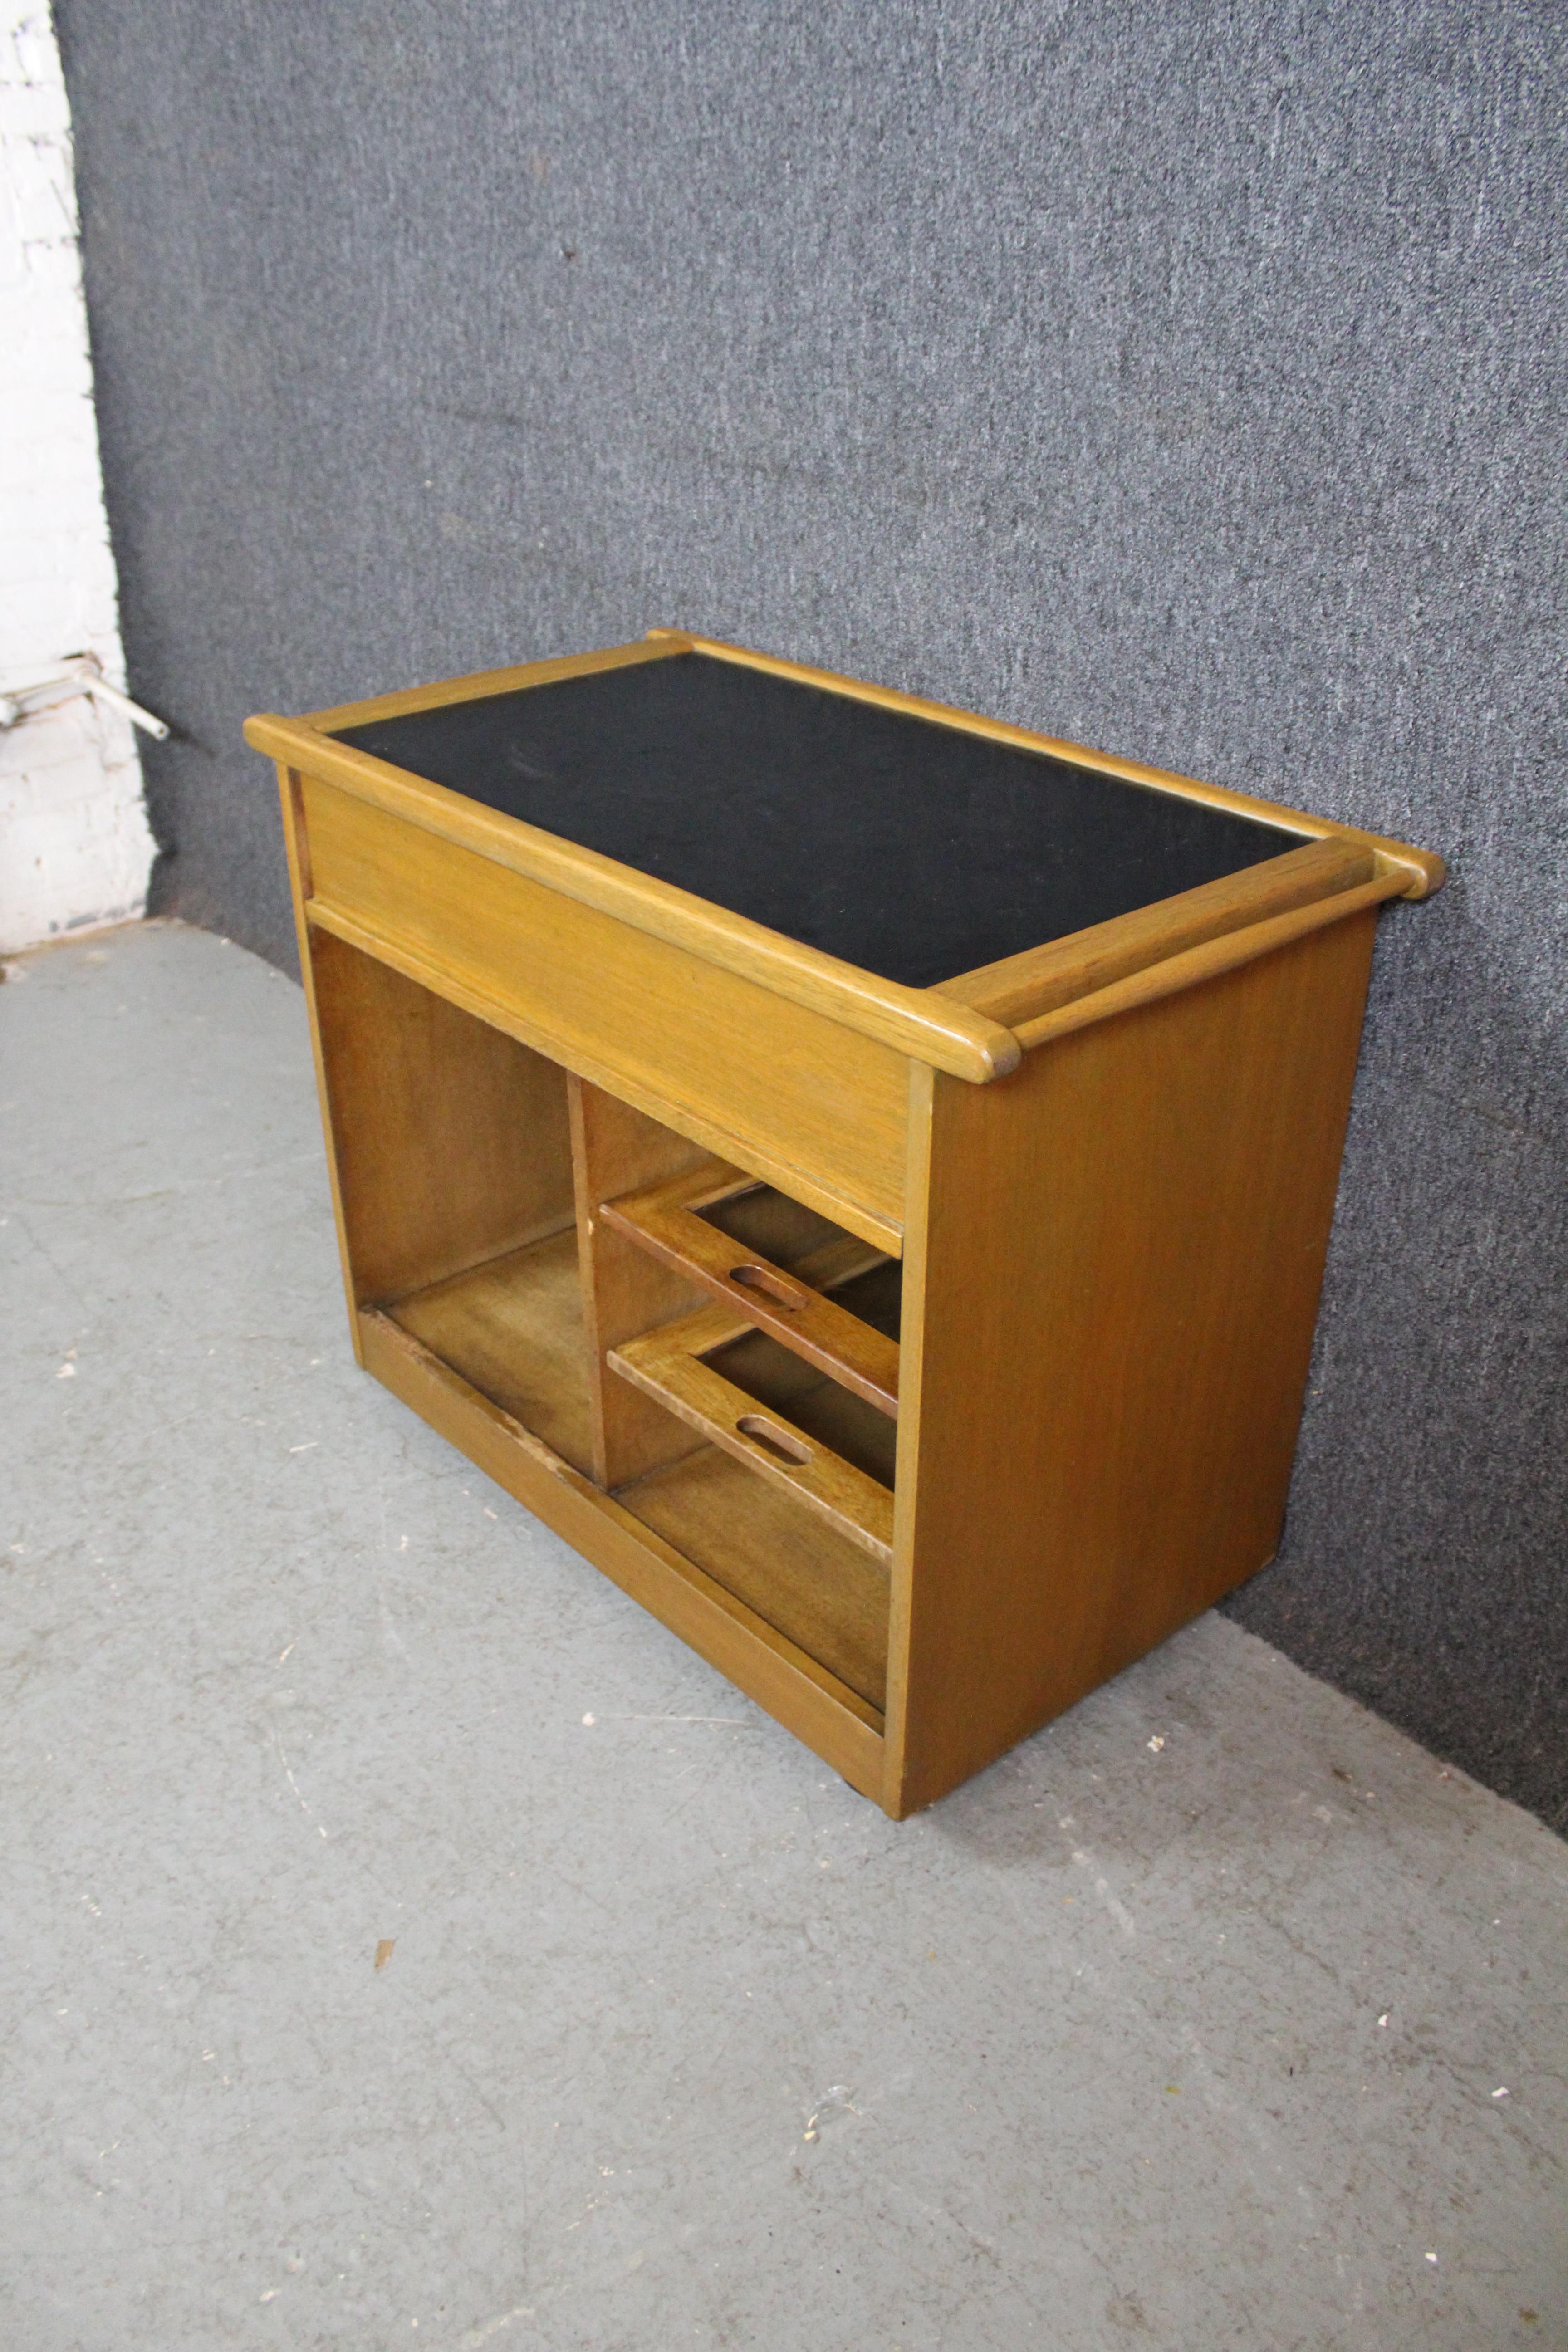 Give your home decor a vintage spin with this mid-century oak cart by Camden, New Jersey's J.B. Van Sciver Furniture Co. This free-wheeling design features a convenient pull-out drawer for storing flatware, napkins, or more; while the bottom